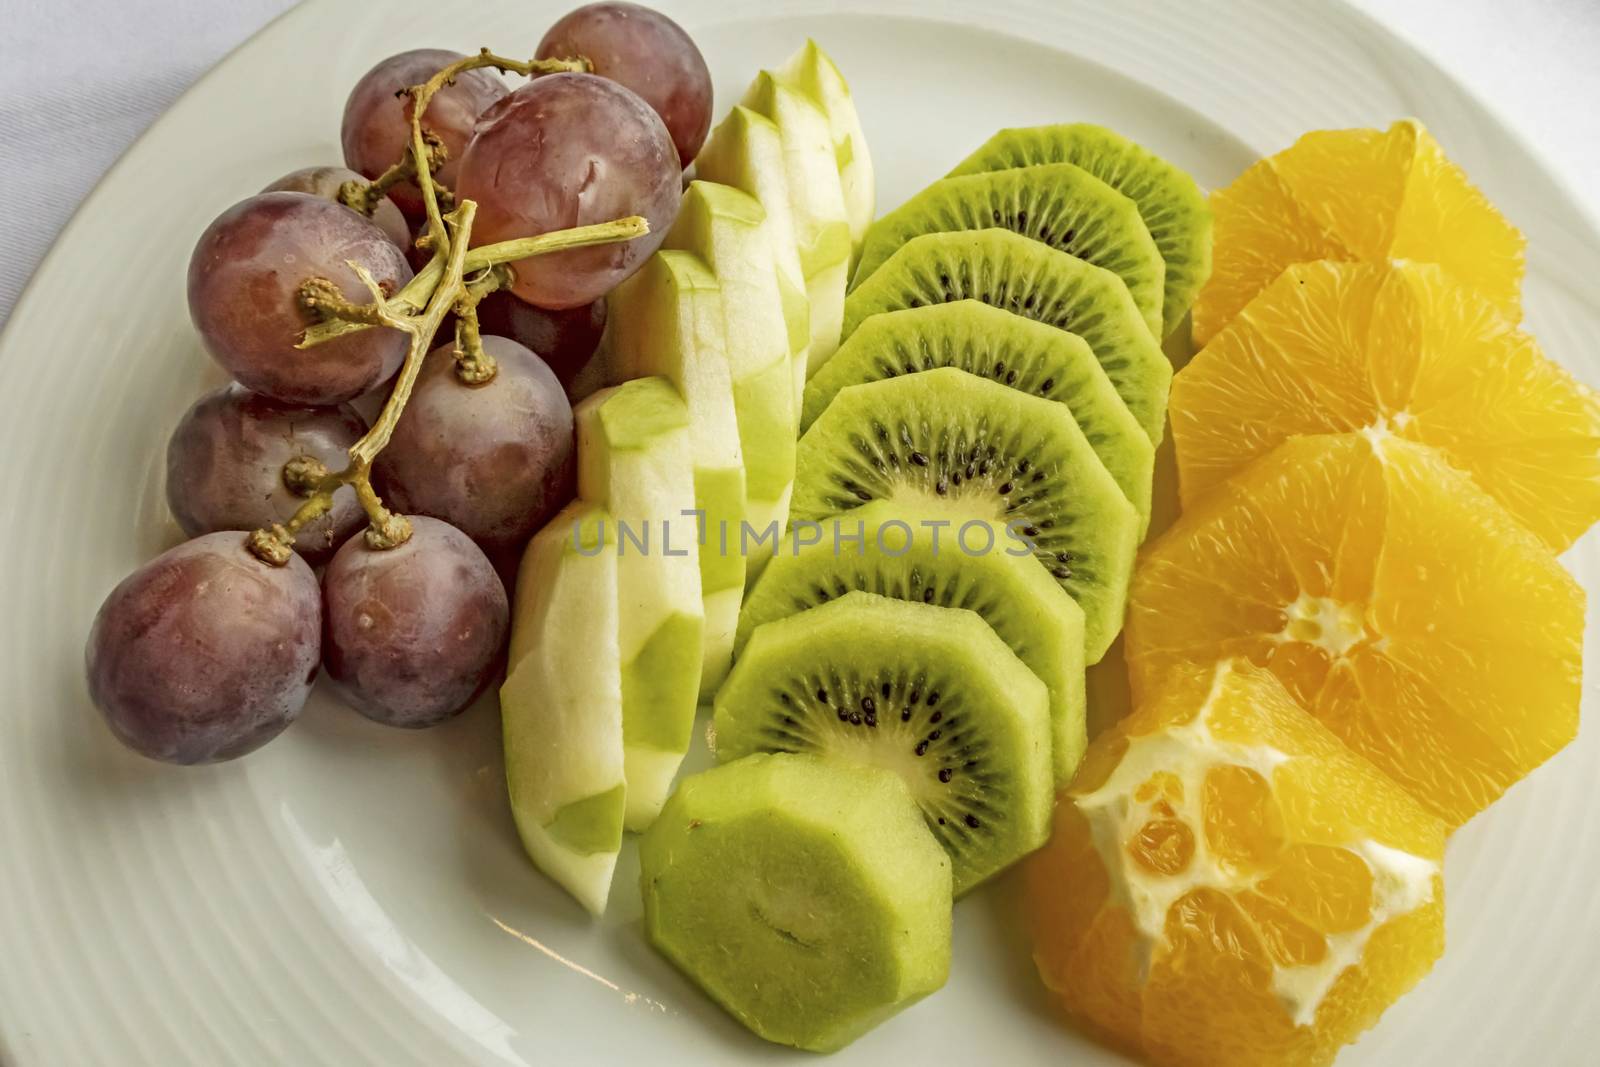 ready to eat sliced mixed fruits in plate